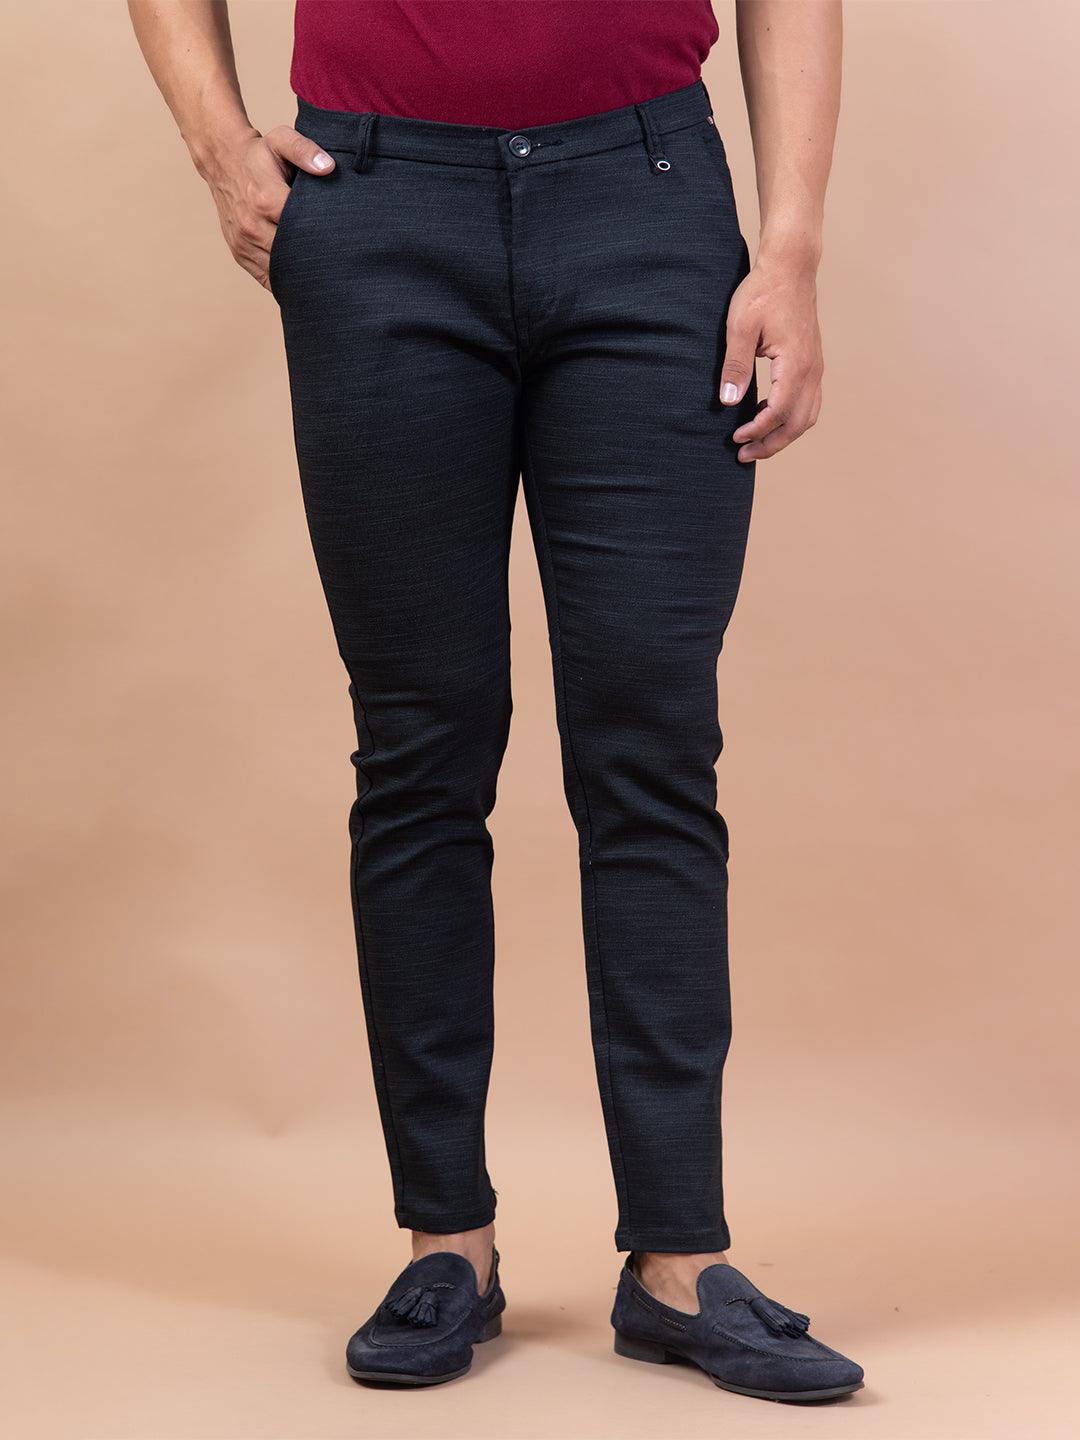 Solid Black Distressed Cotton Pant - Tistabene